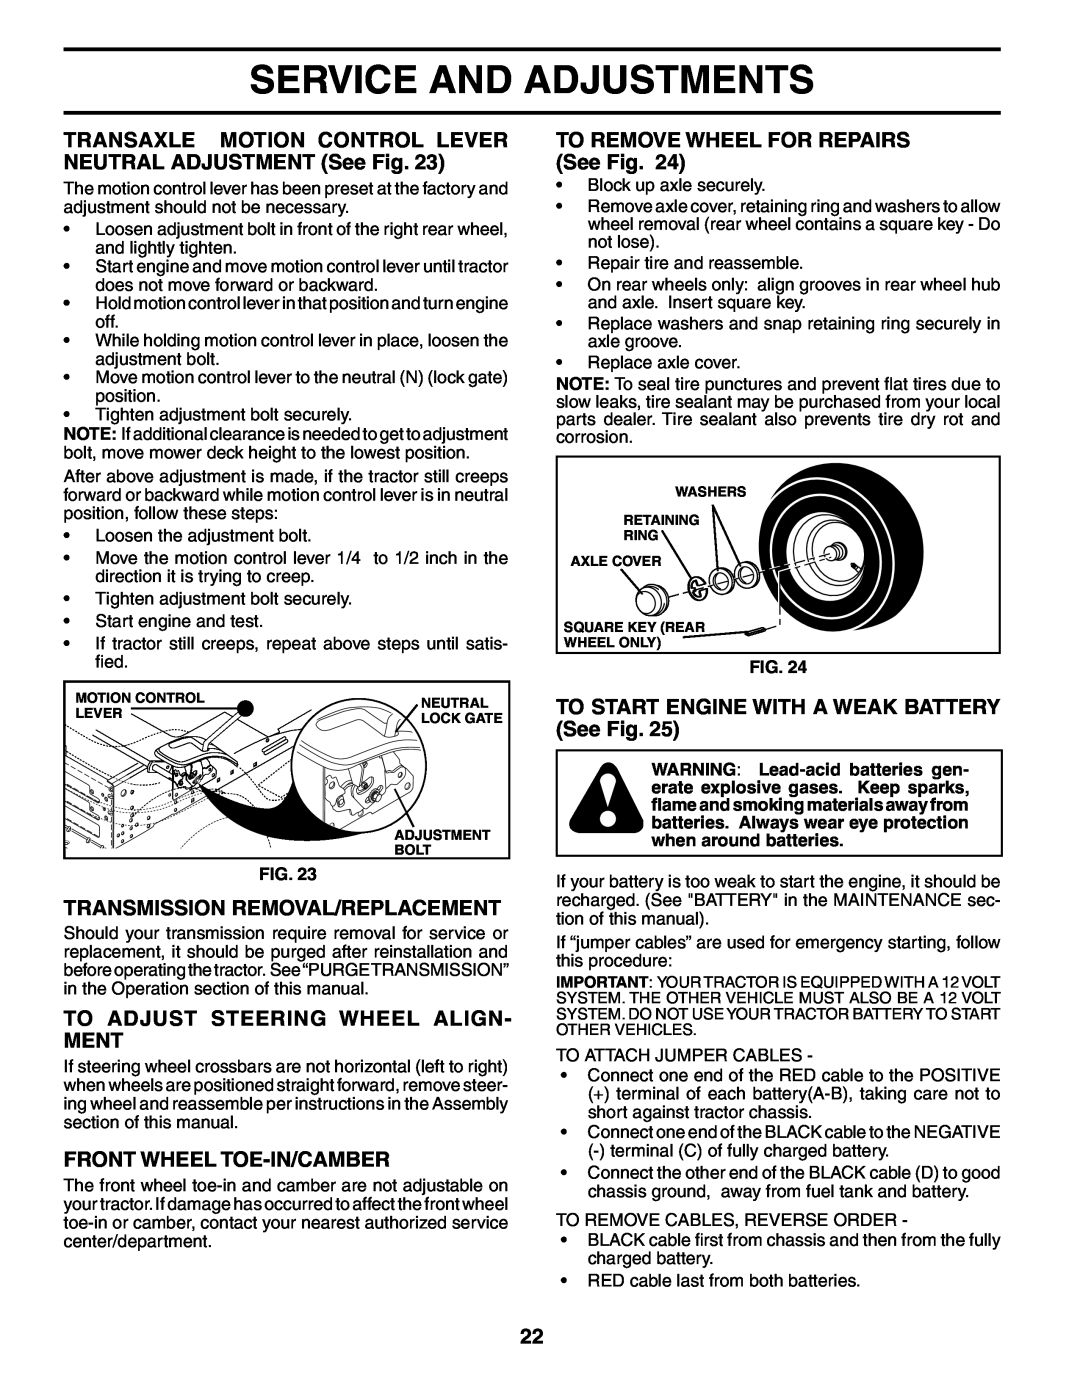 Poulan XT24H42YT manual Transmission Removal/Replacement, To Adjust Steering Wheel Align- Ment, Front Wheel Toe-In/Camber 